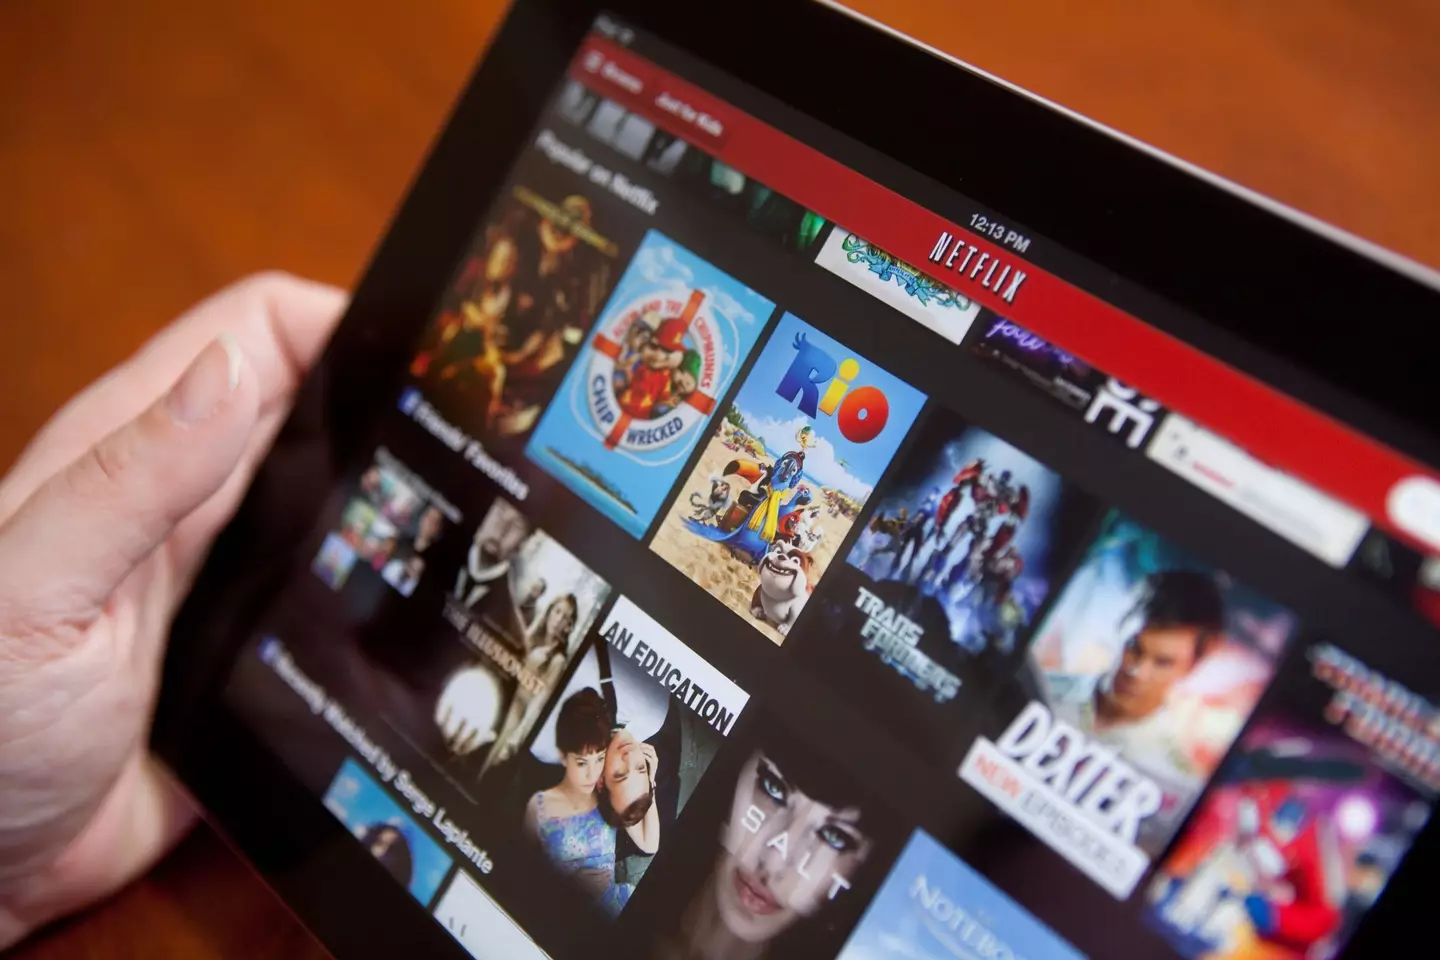 The streaming service is facing a drop in the number of subscribers and the share price.